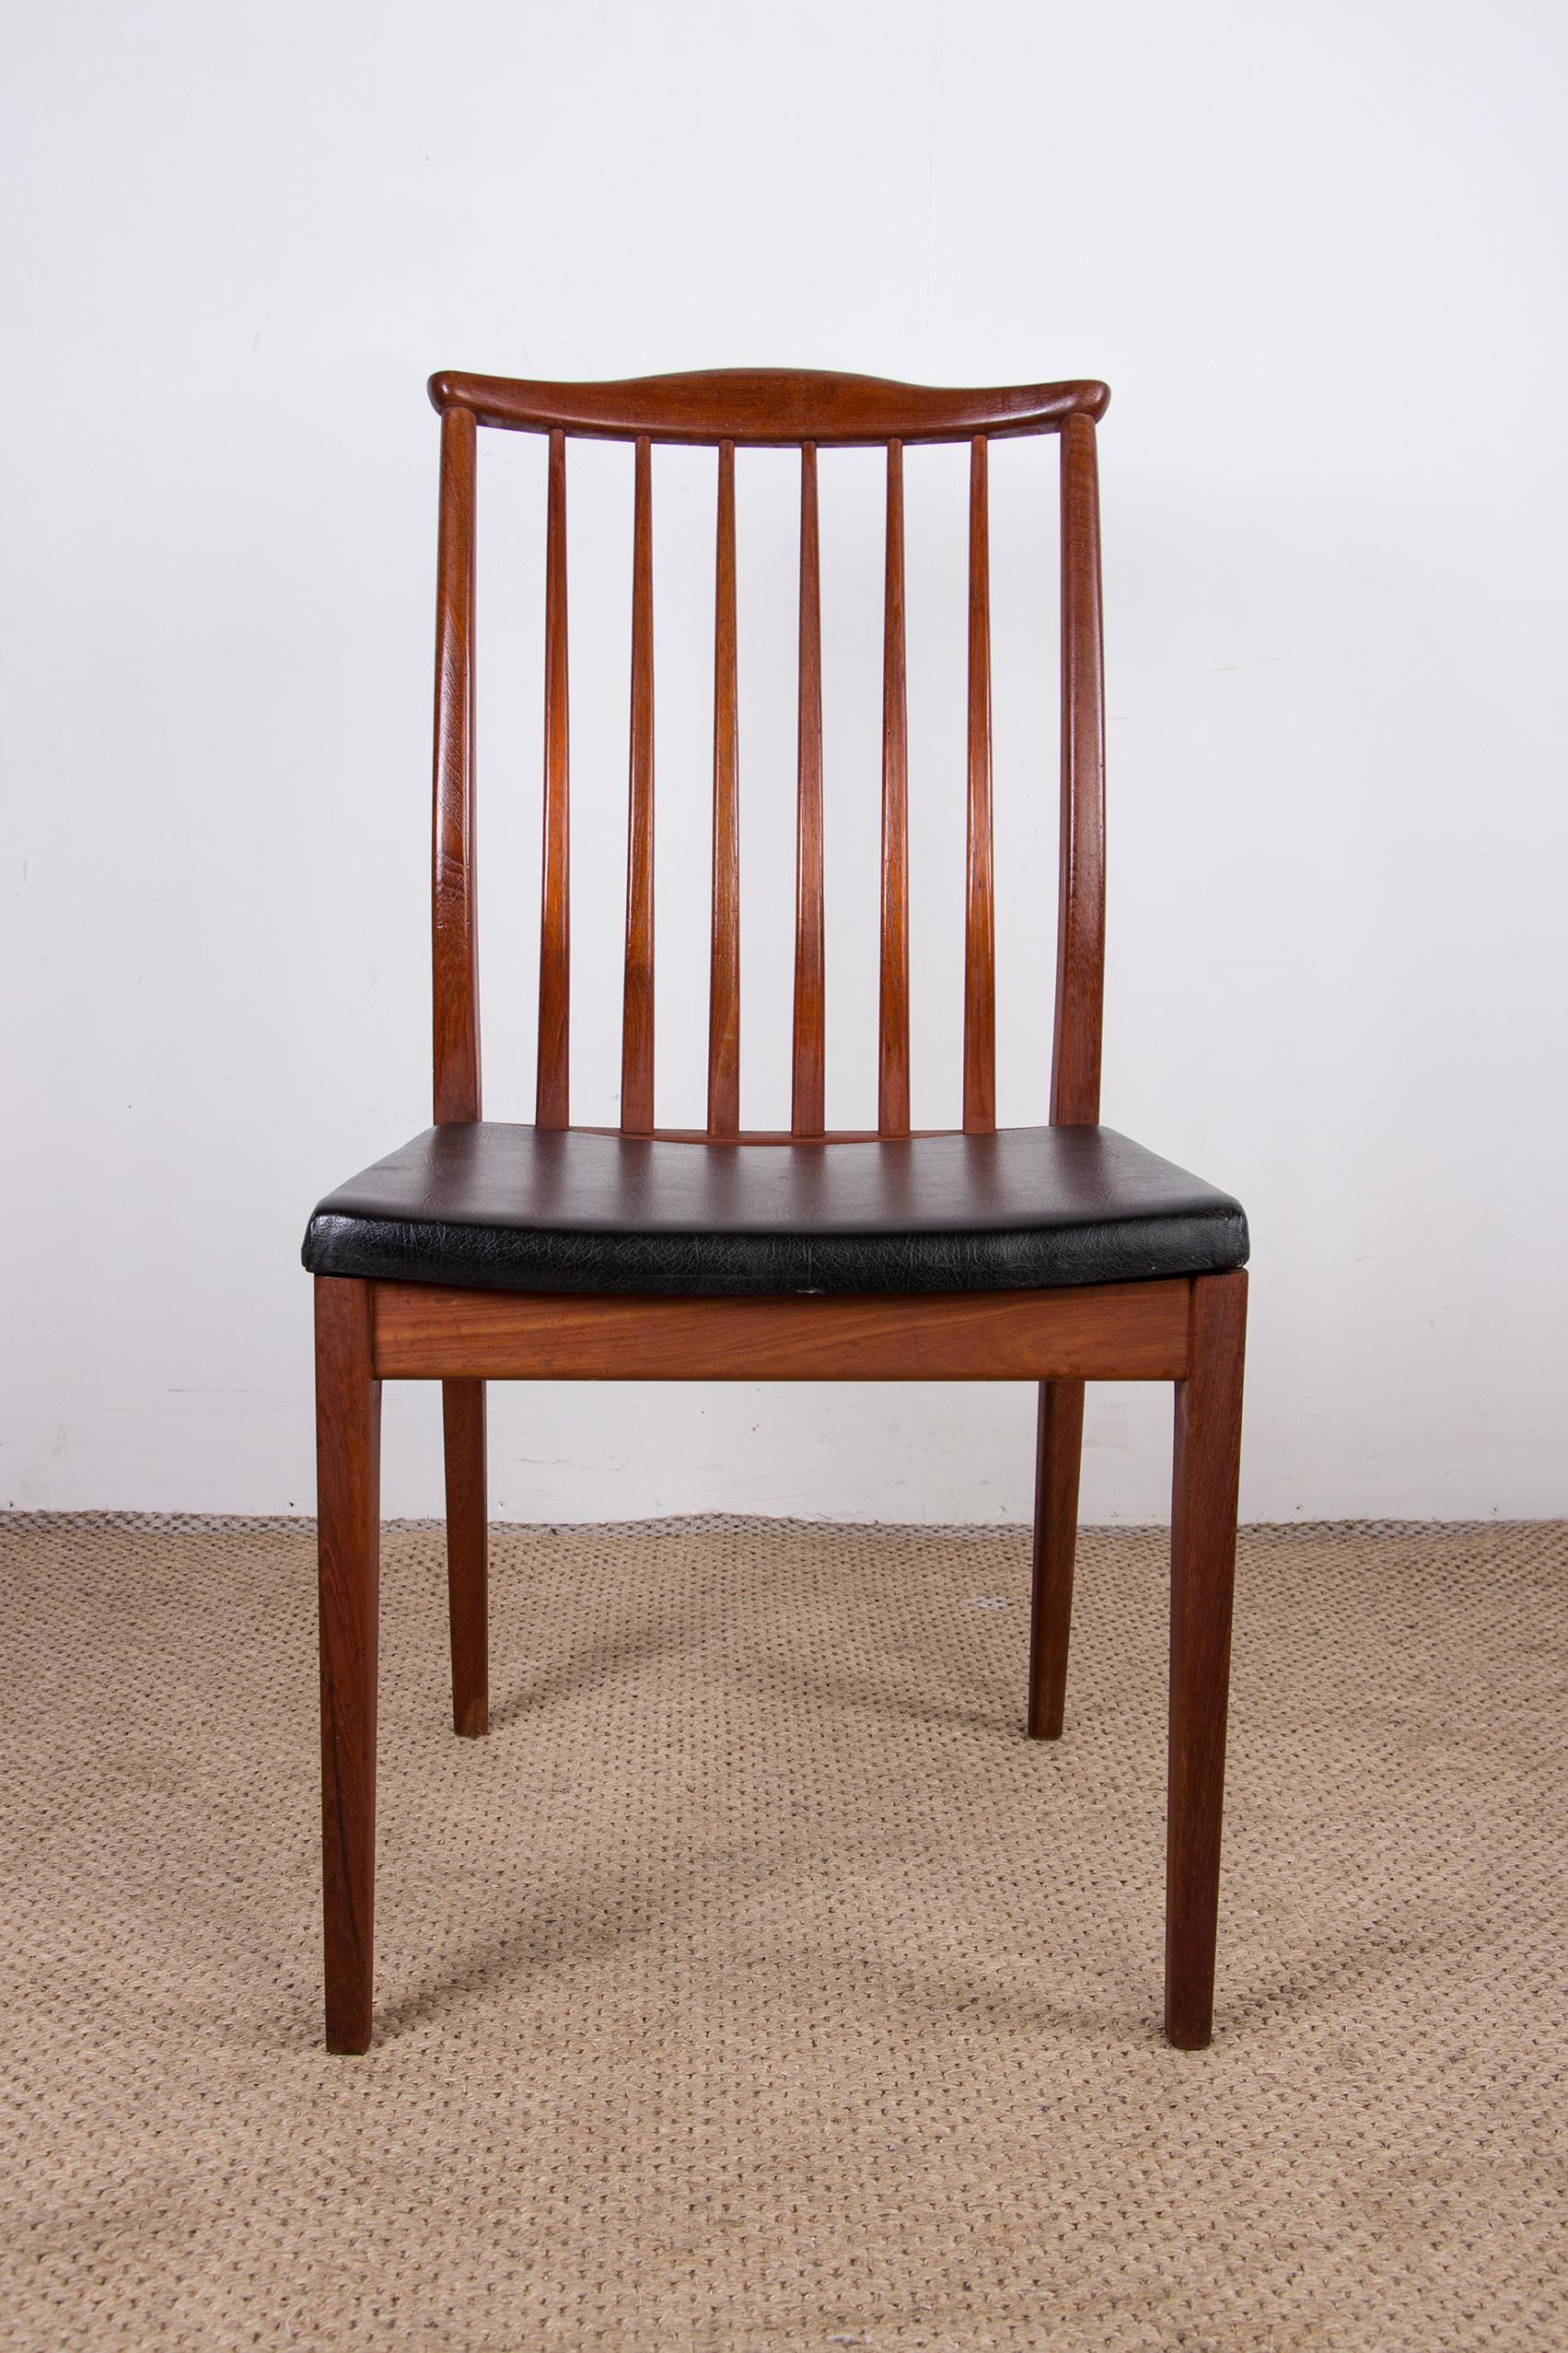 Stunning Scandinavian dining chairs. Very elegant and airy design. Great Comfort.
Nice build quality.